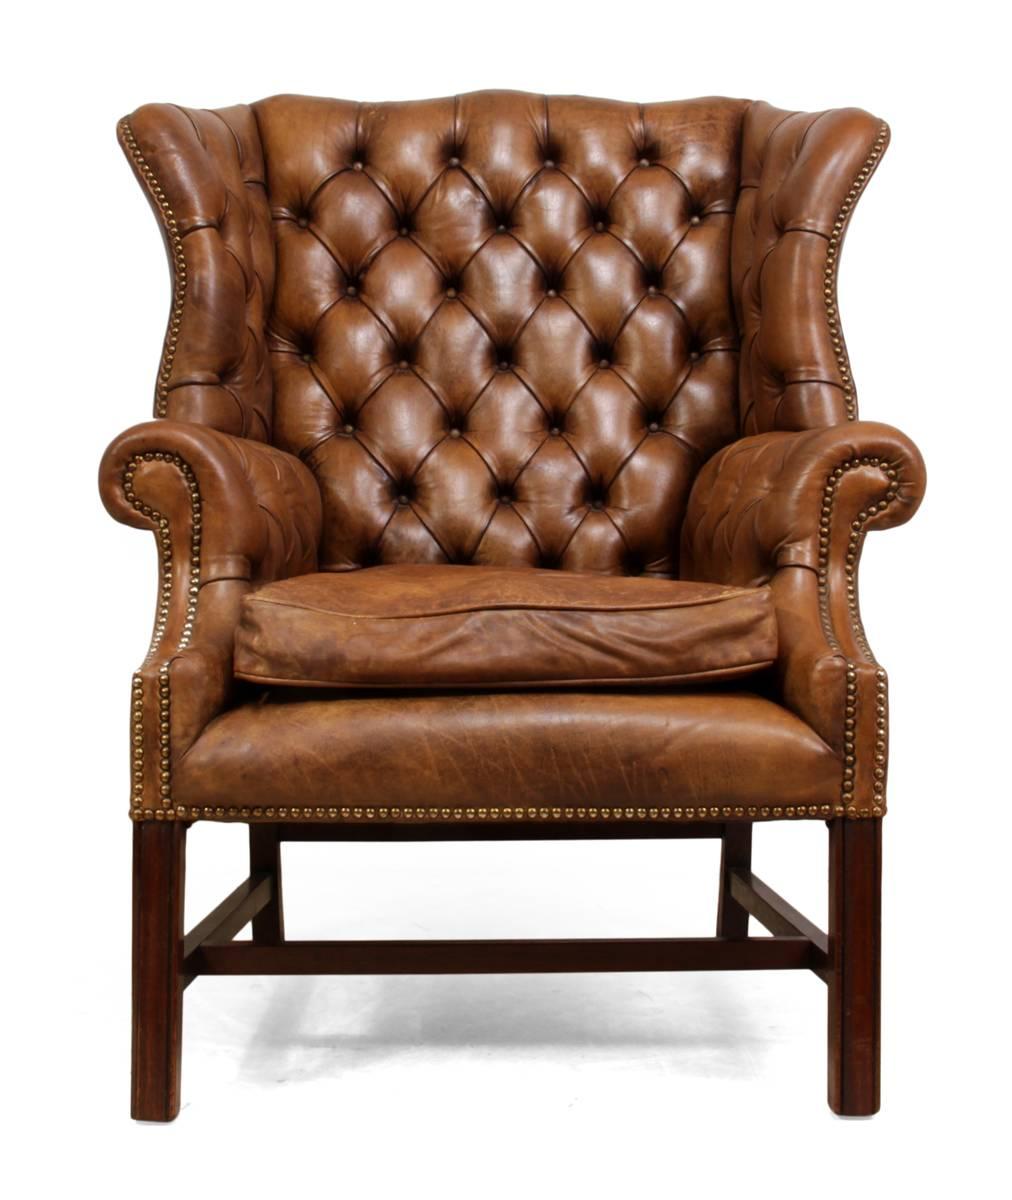 Vintage leather wing chair.
This leather wing chair was produced around the 1960s it has a solid Mahogany frame and tan colored hide upholstery. The seat cushion is down filled, there are two small professional repairs to the leather that are